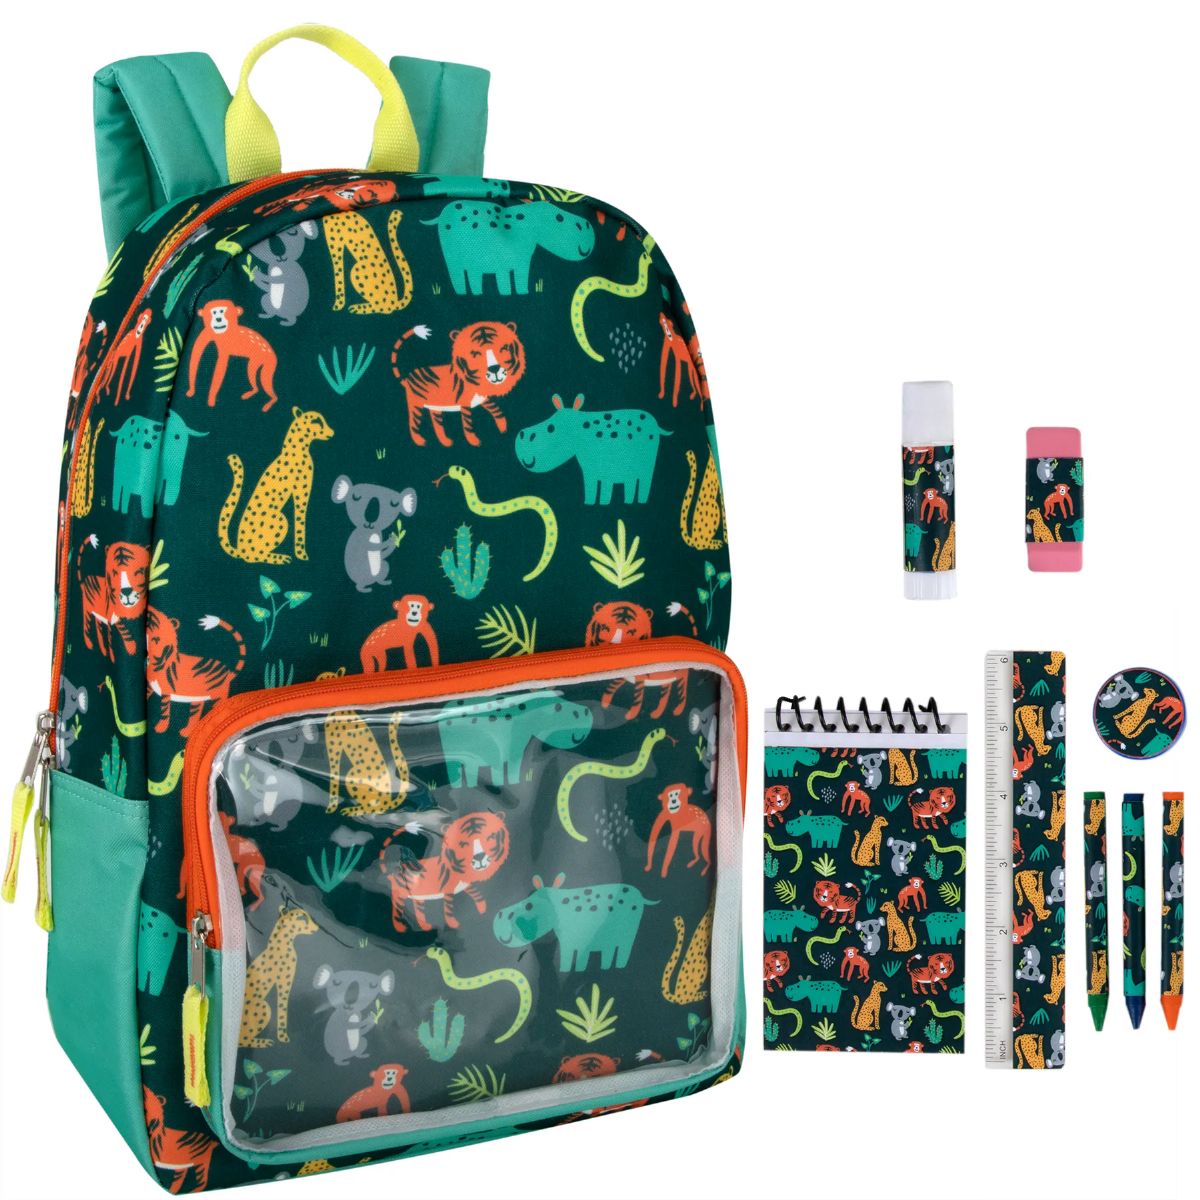 24 Wholesale 17 Inch Jungle Backpack And 9 Piece School Supply Kit